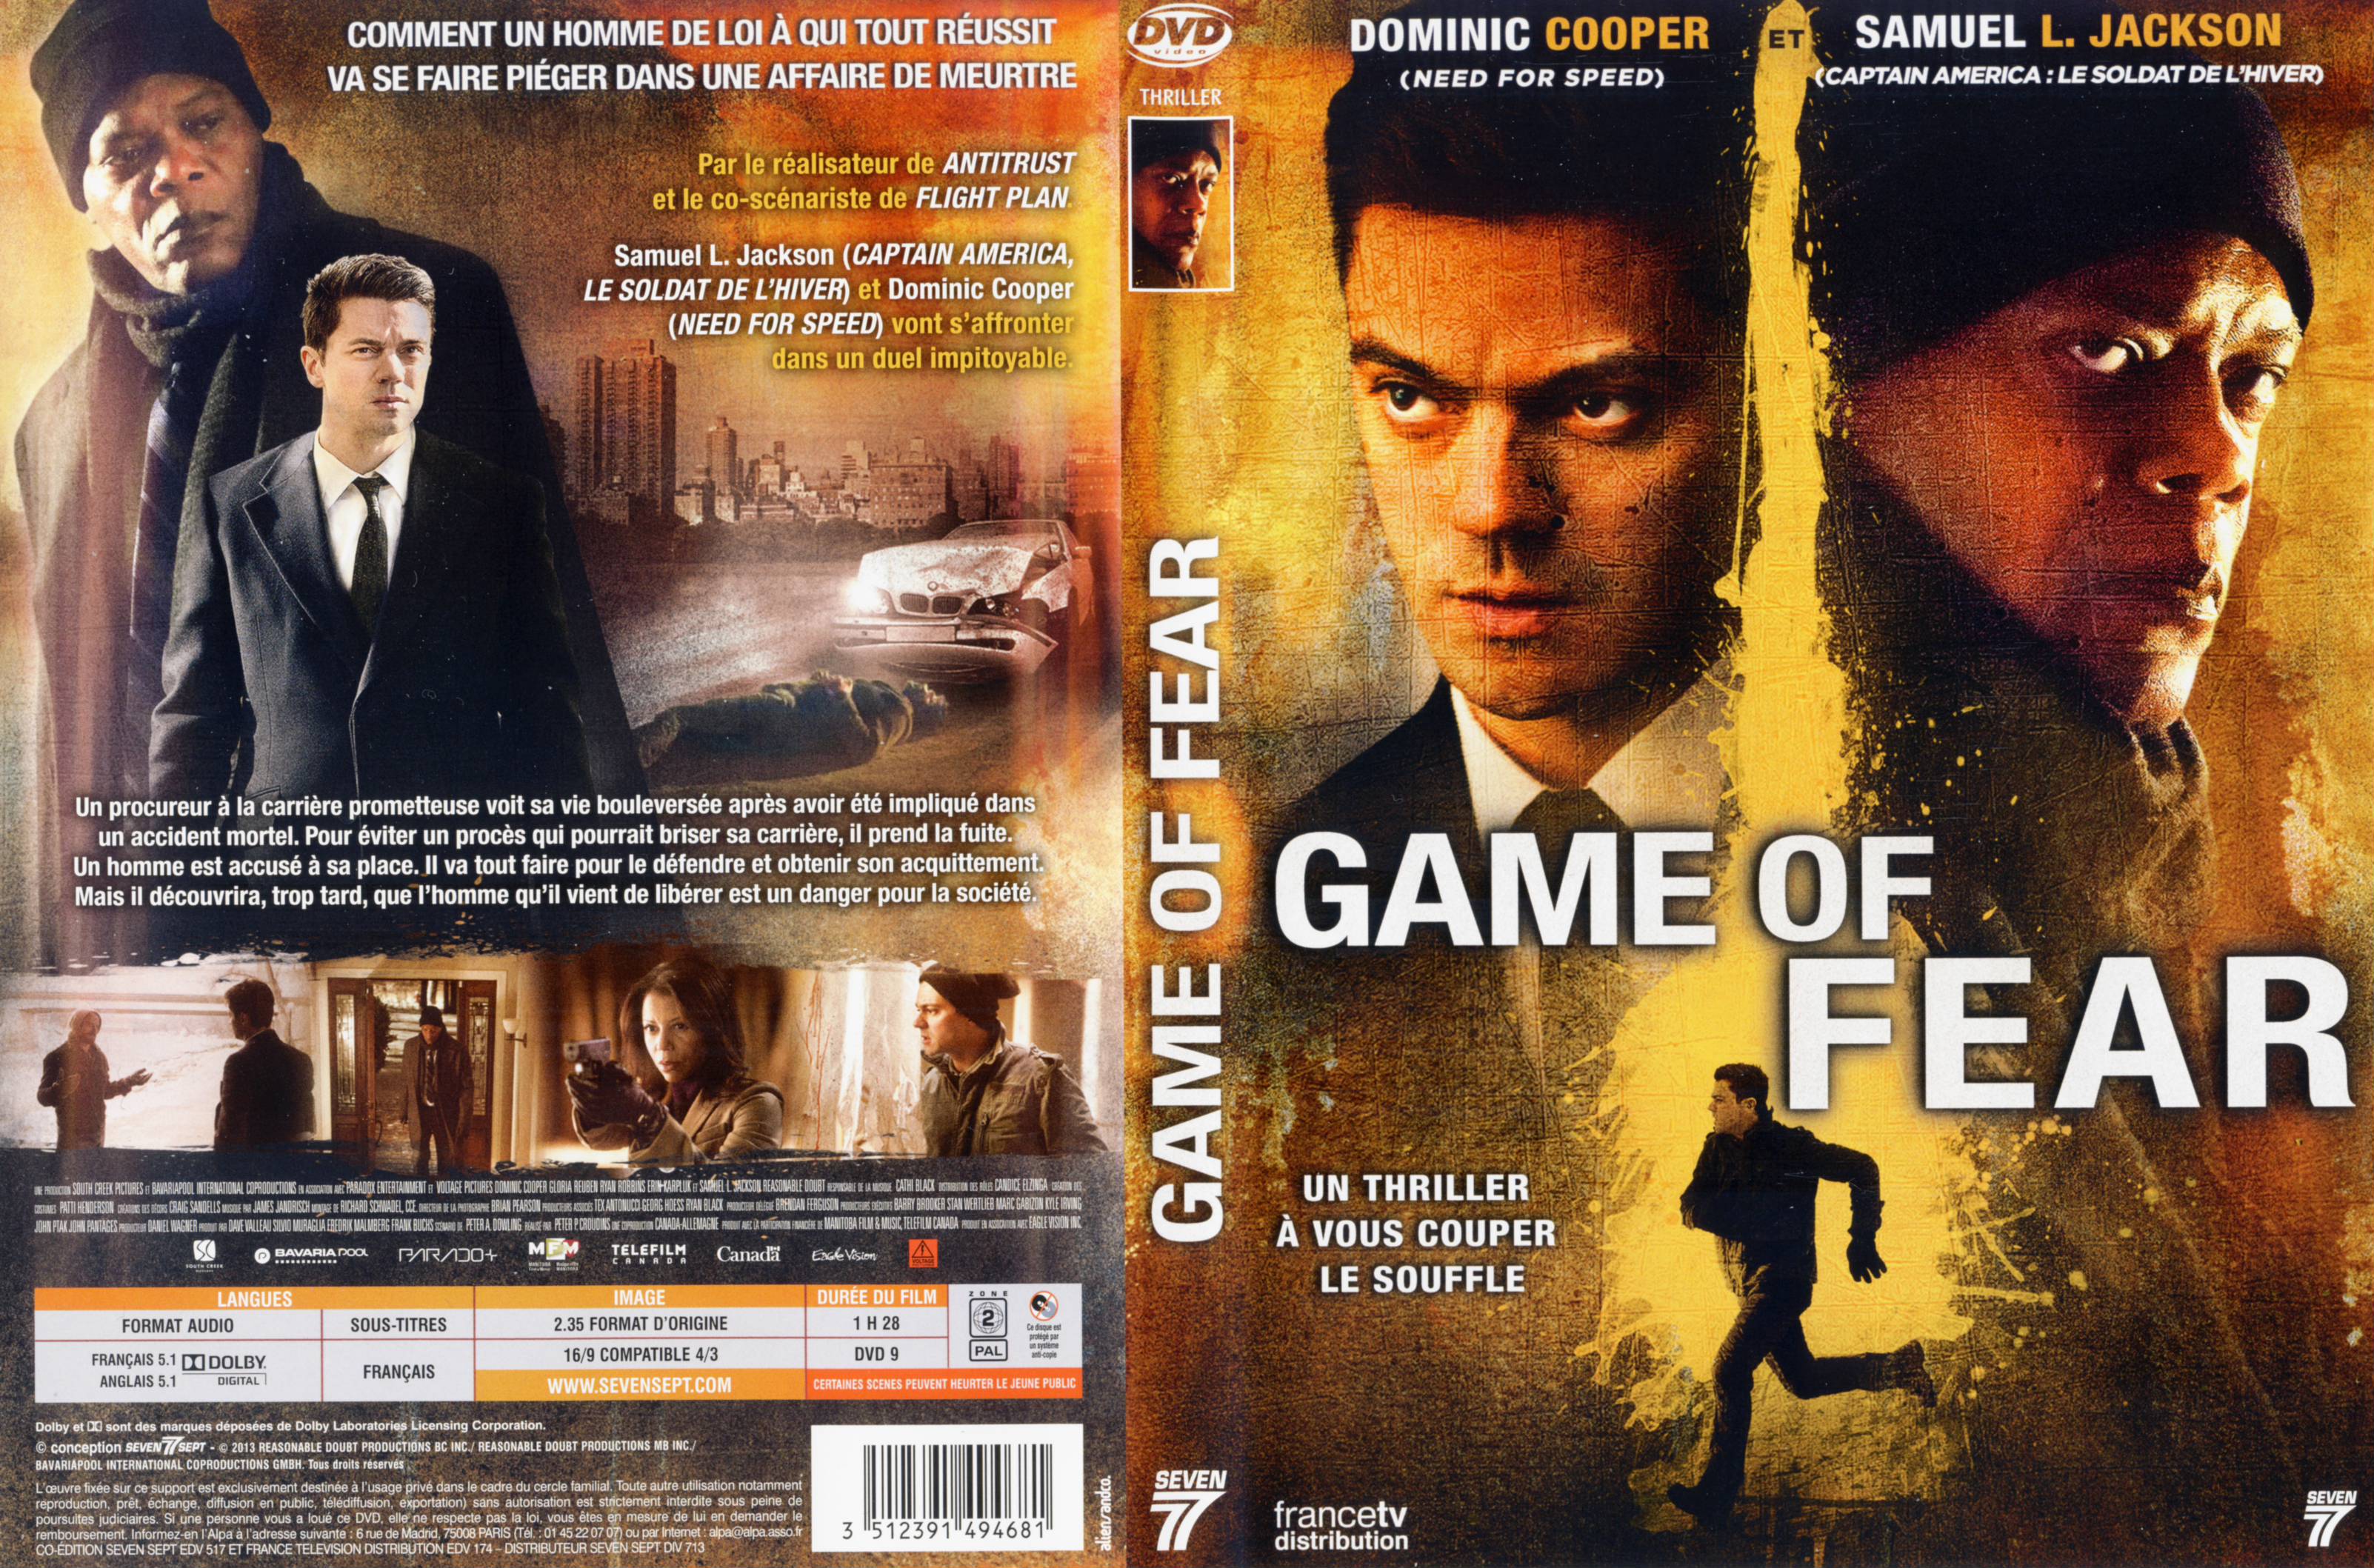 Jaquette DVD Game of Fear